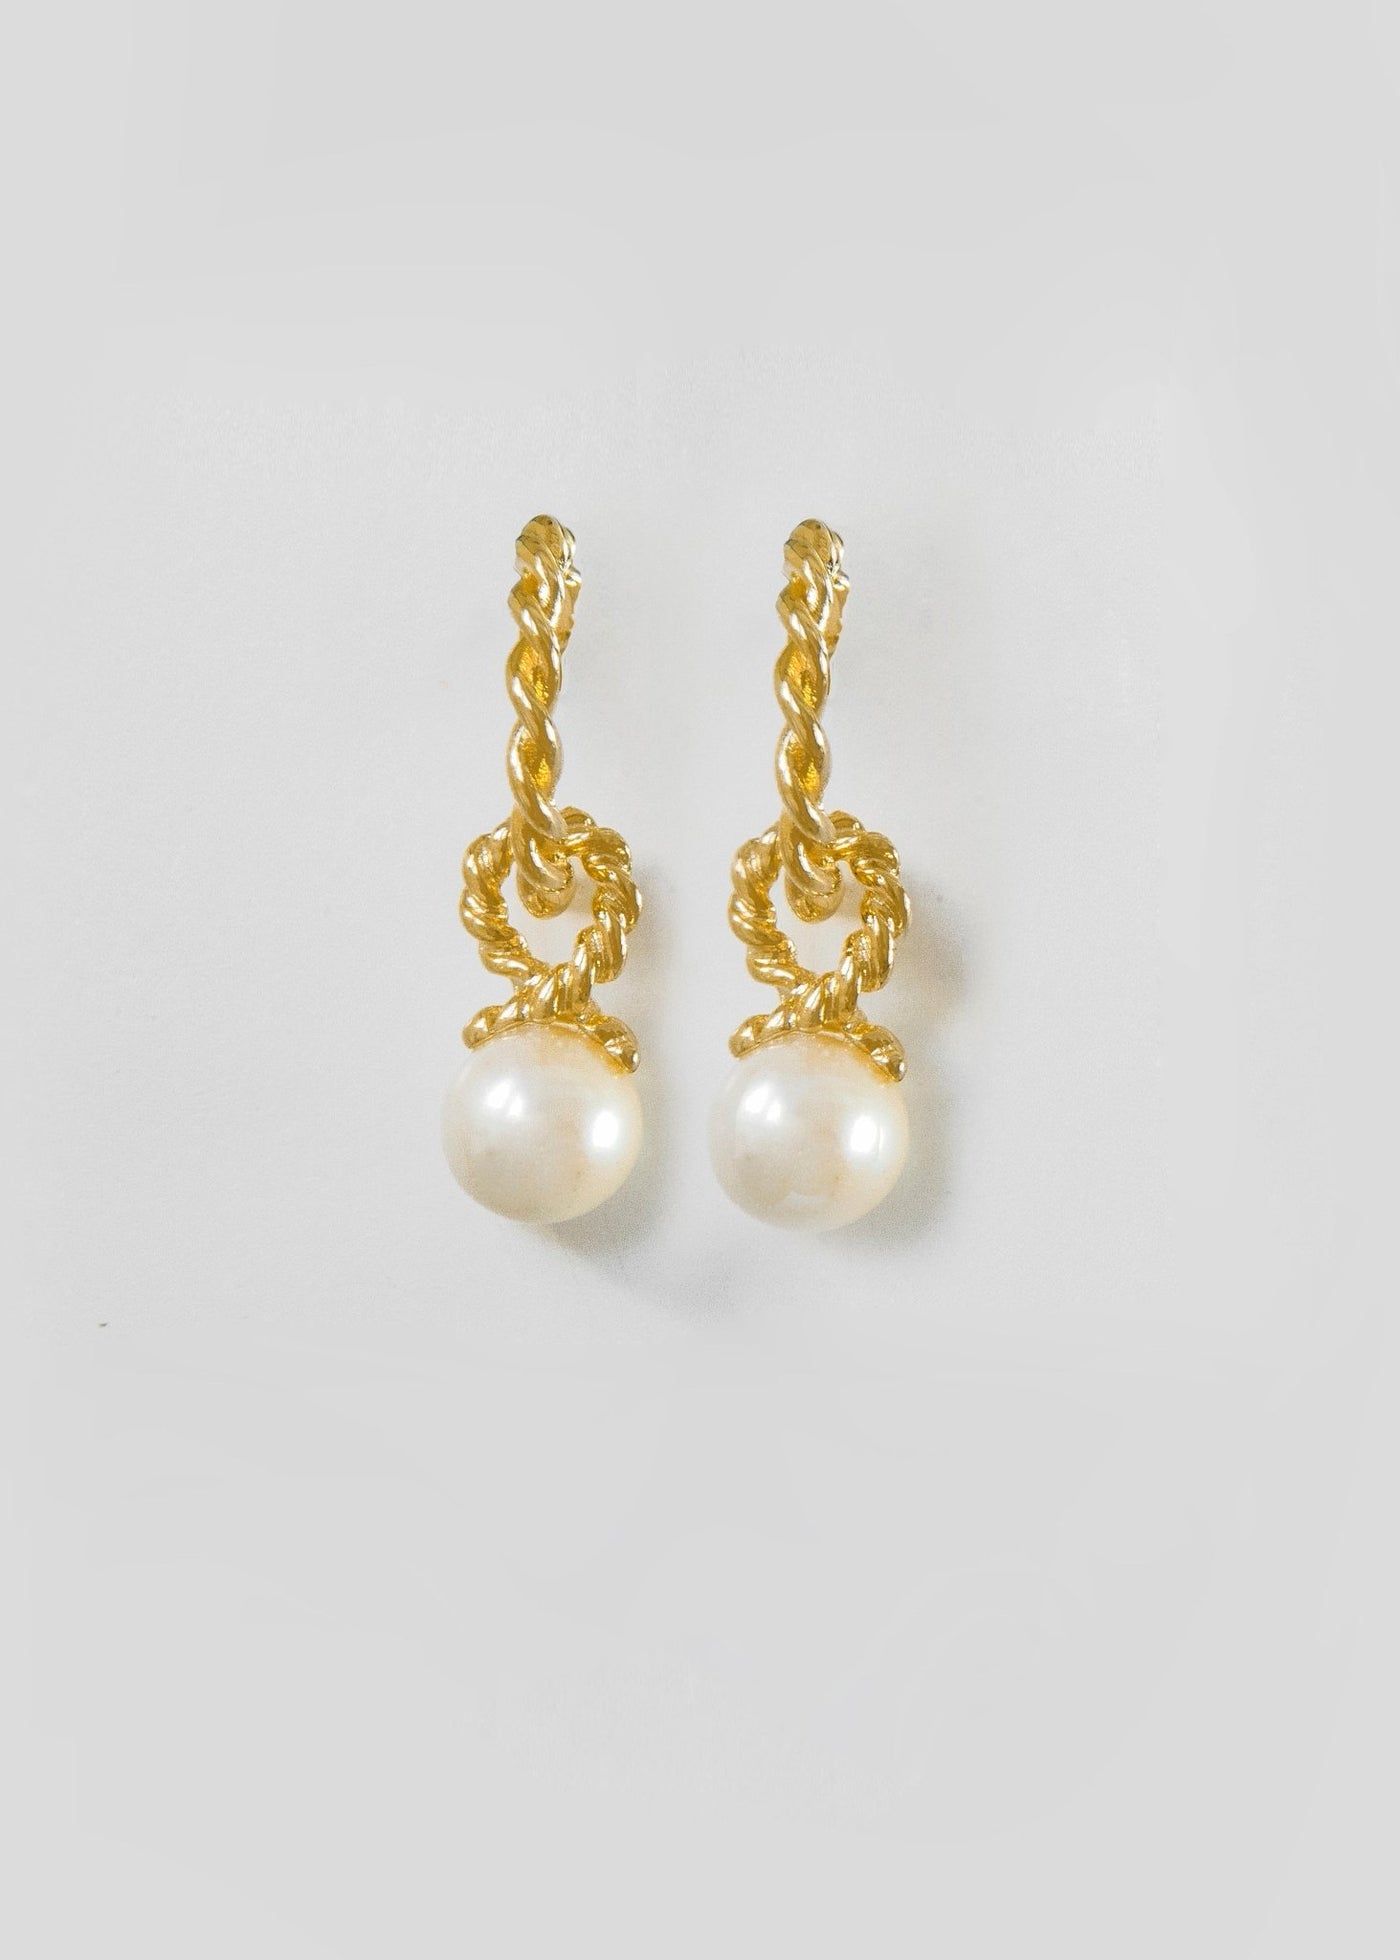 Twisted Gold Hoops with Faux Pearl Pendant - Maids to Measure